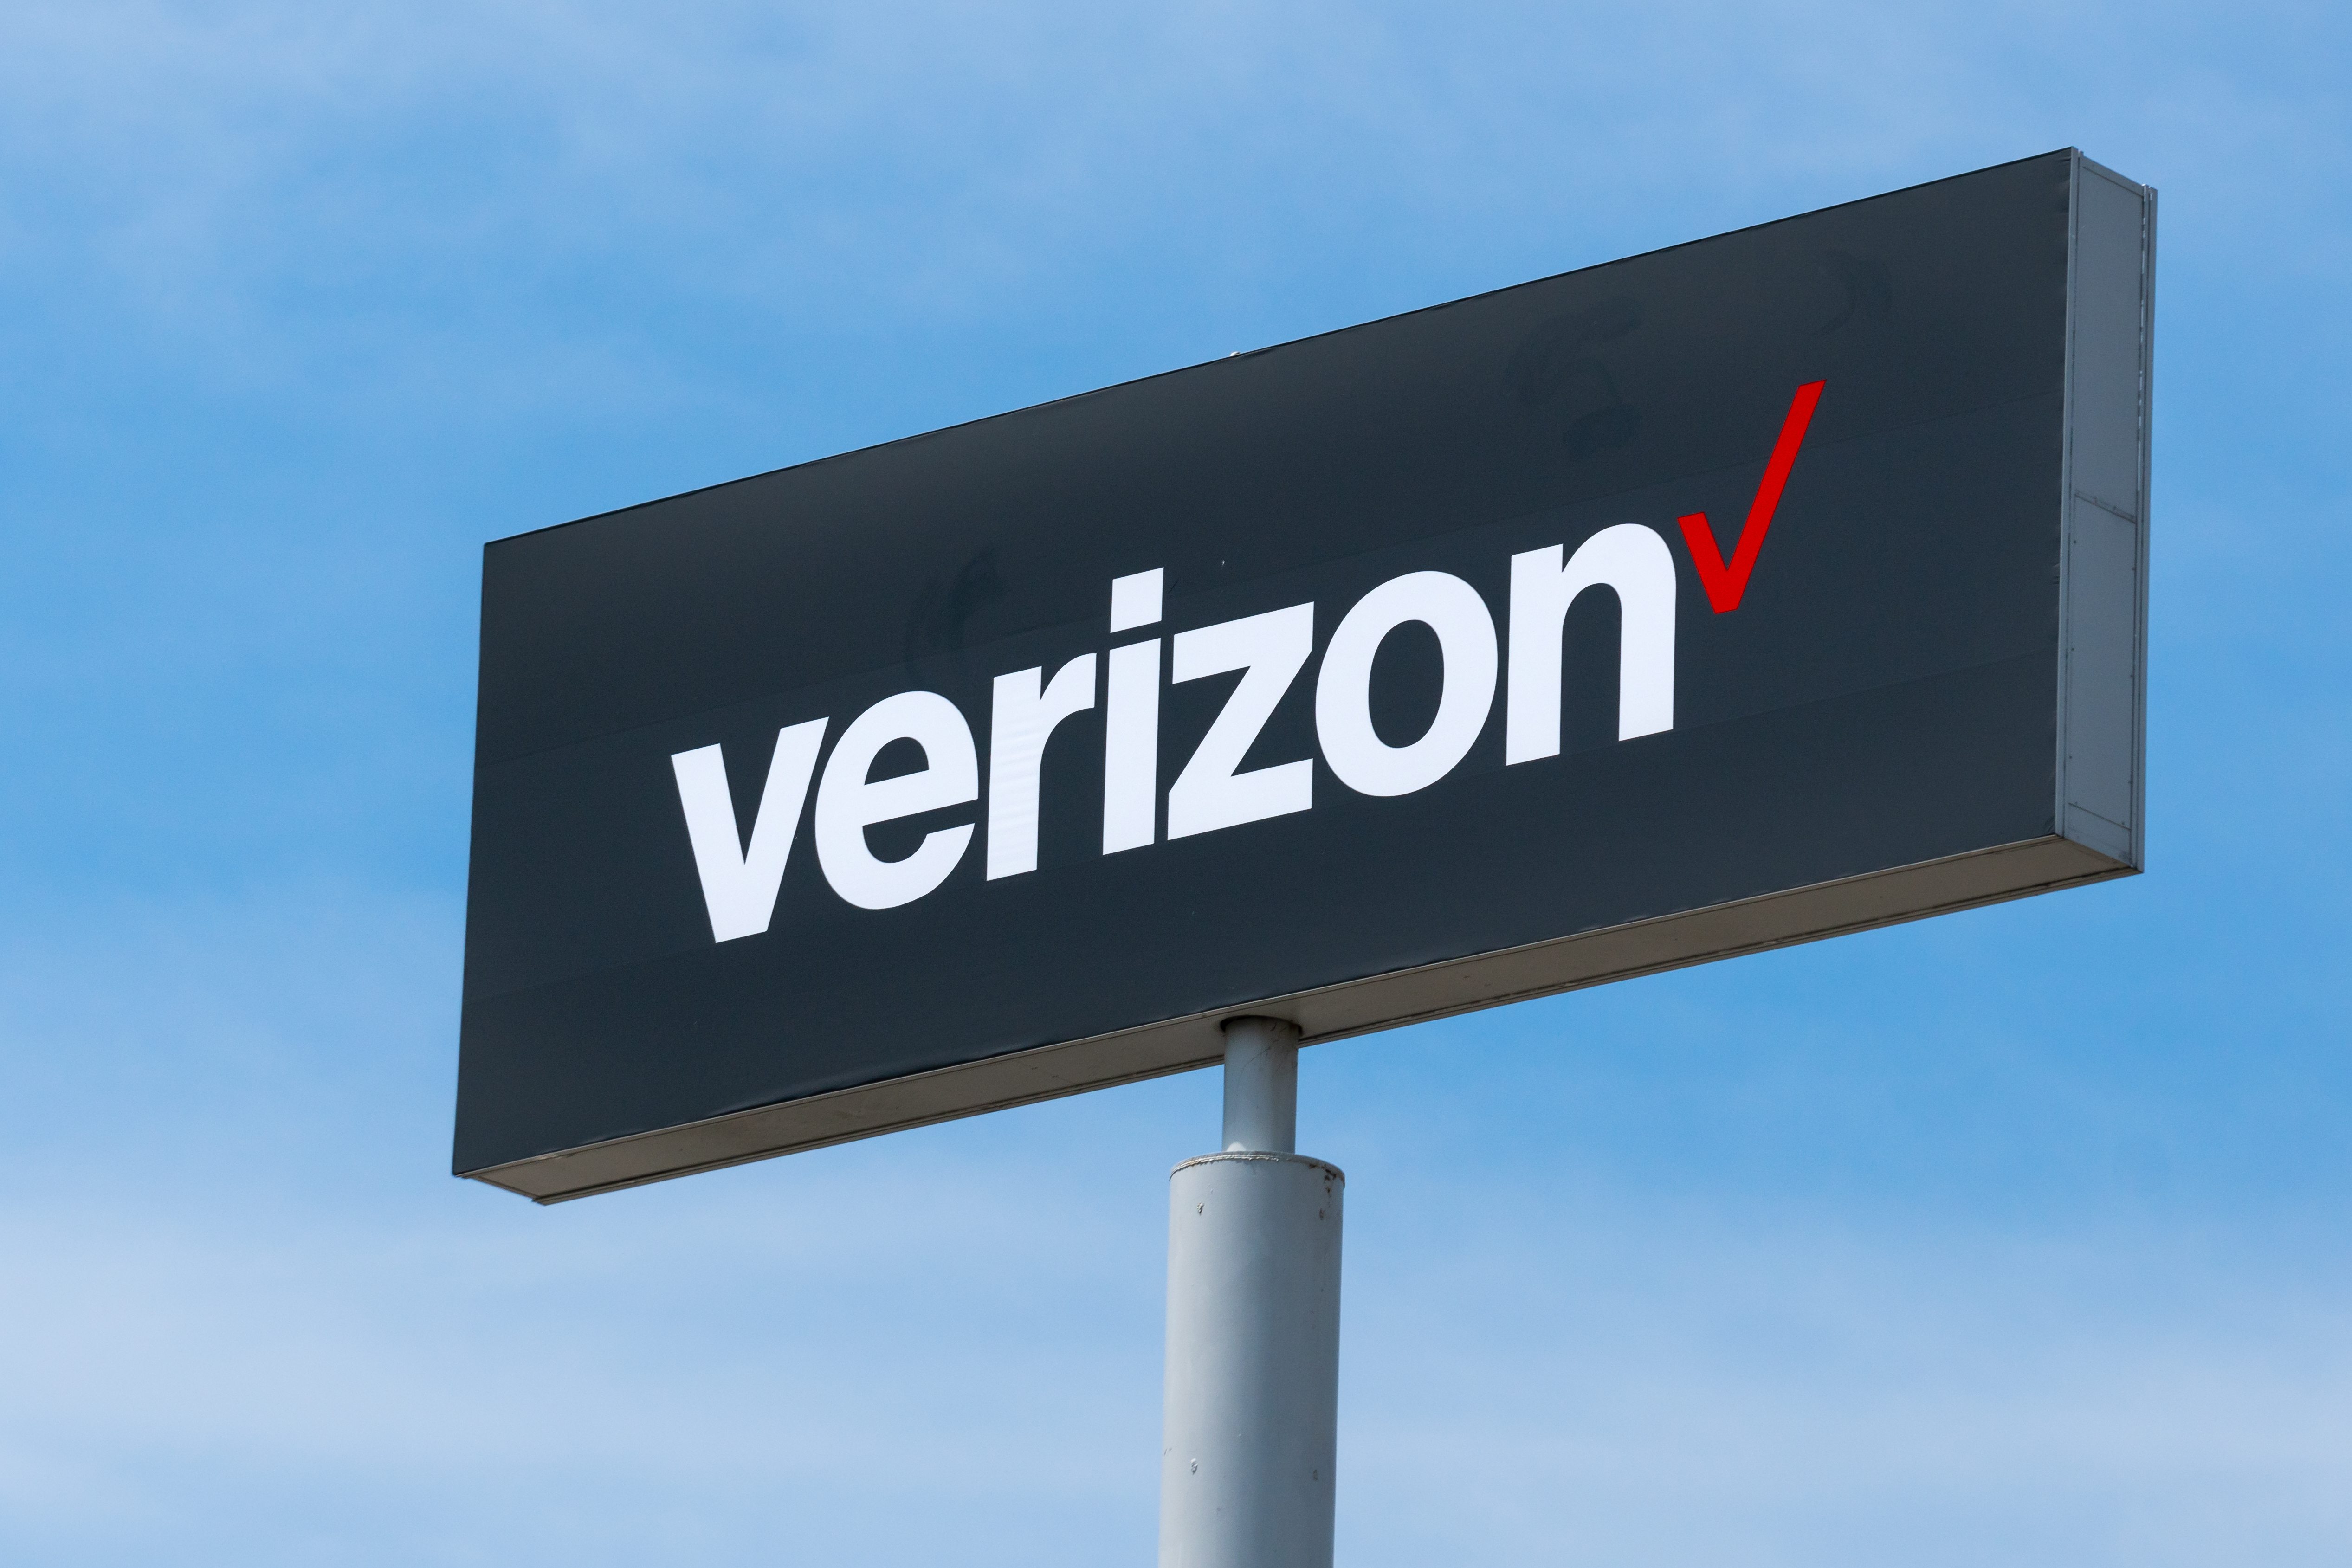 Verizon 5G Home Internet Is Getting Better As Verizon Can Now Upgrade Its Network Faster With No Down Time